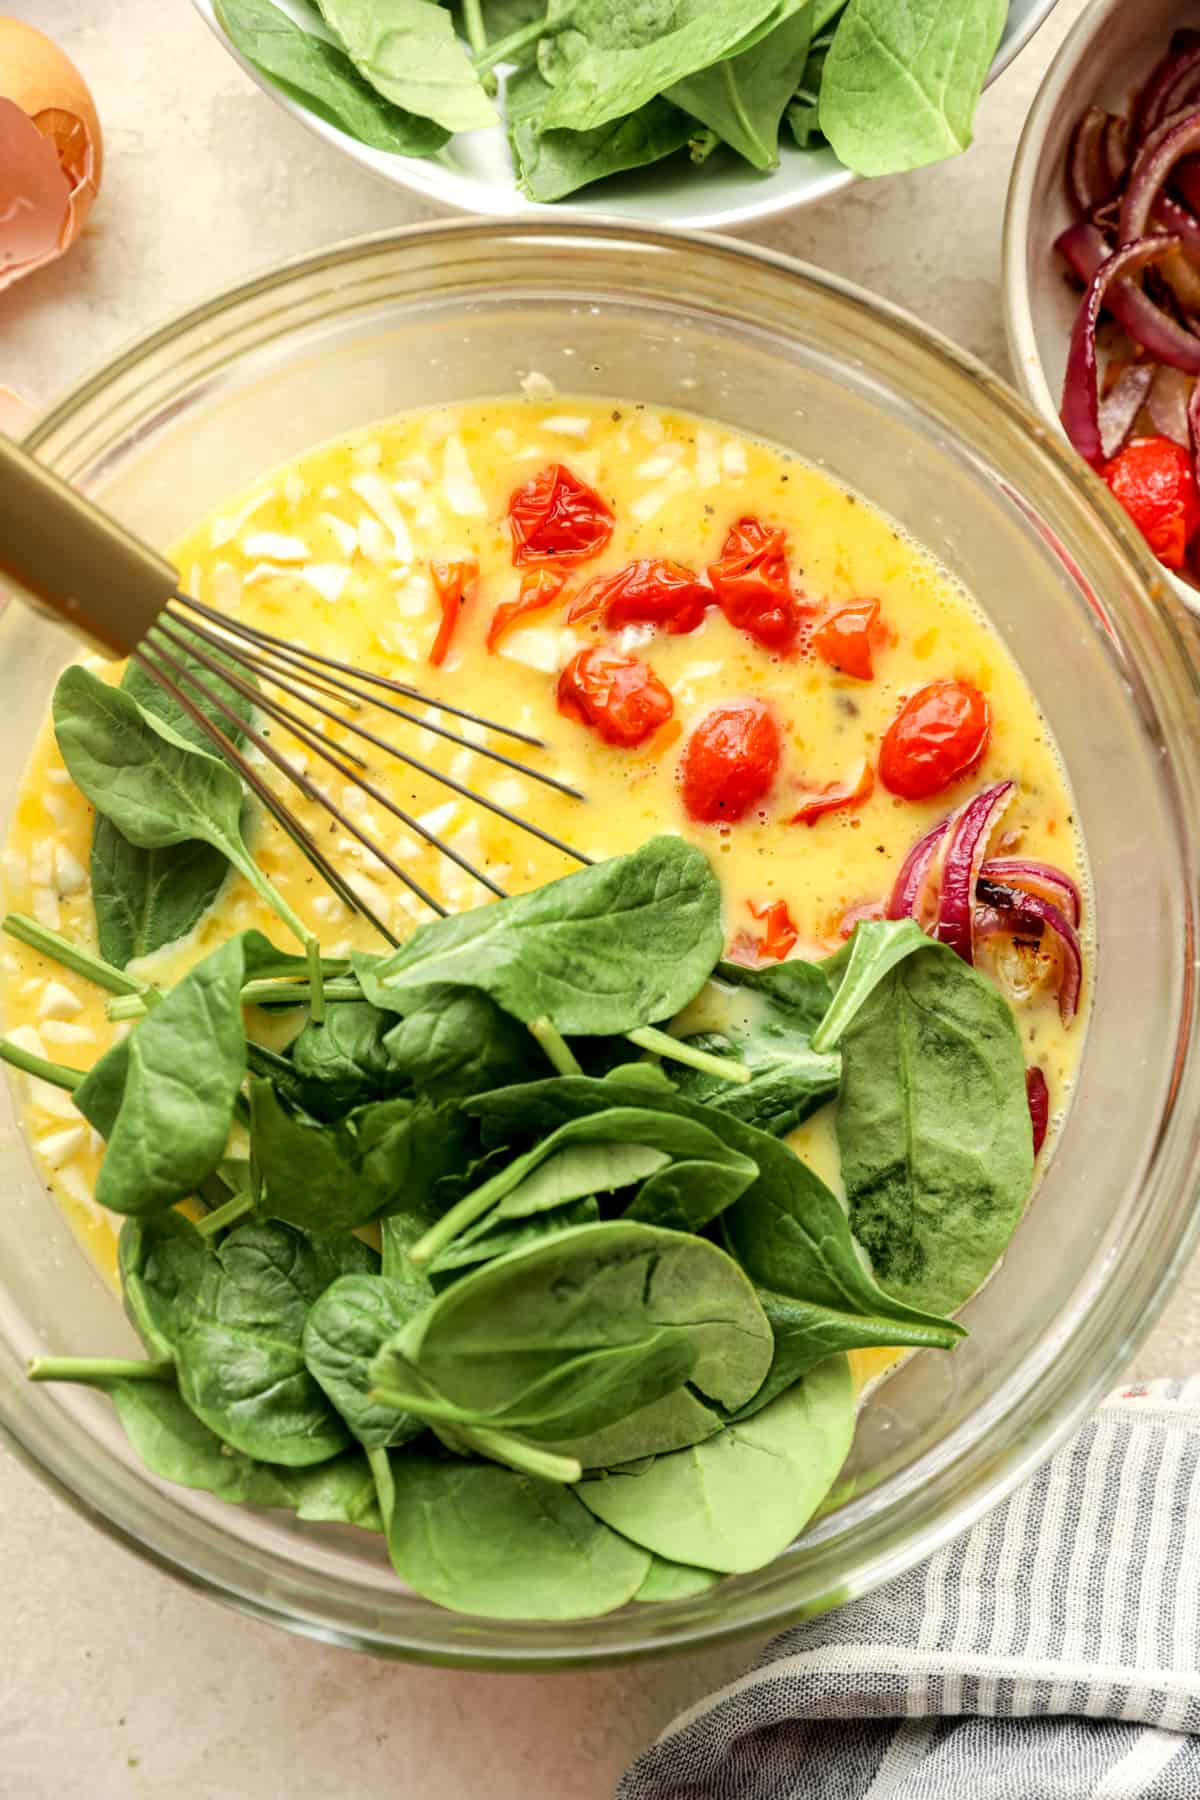 A bowl filled with eggs, spinach and tomatoes.